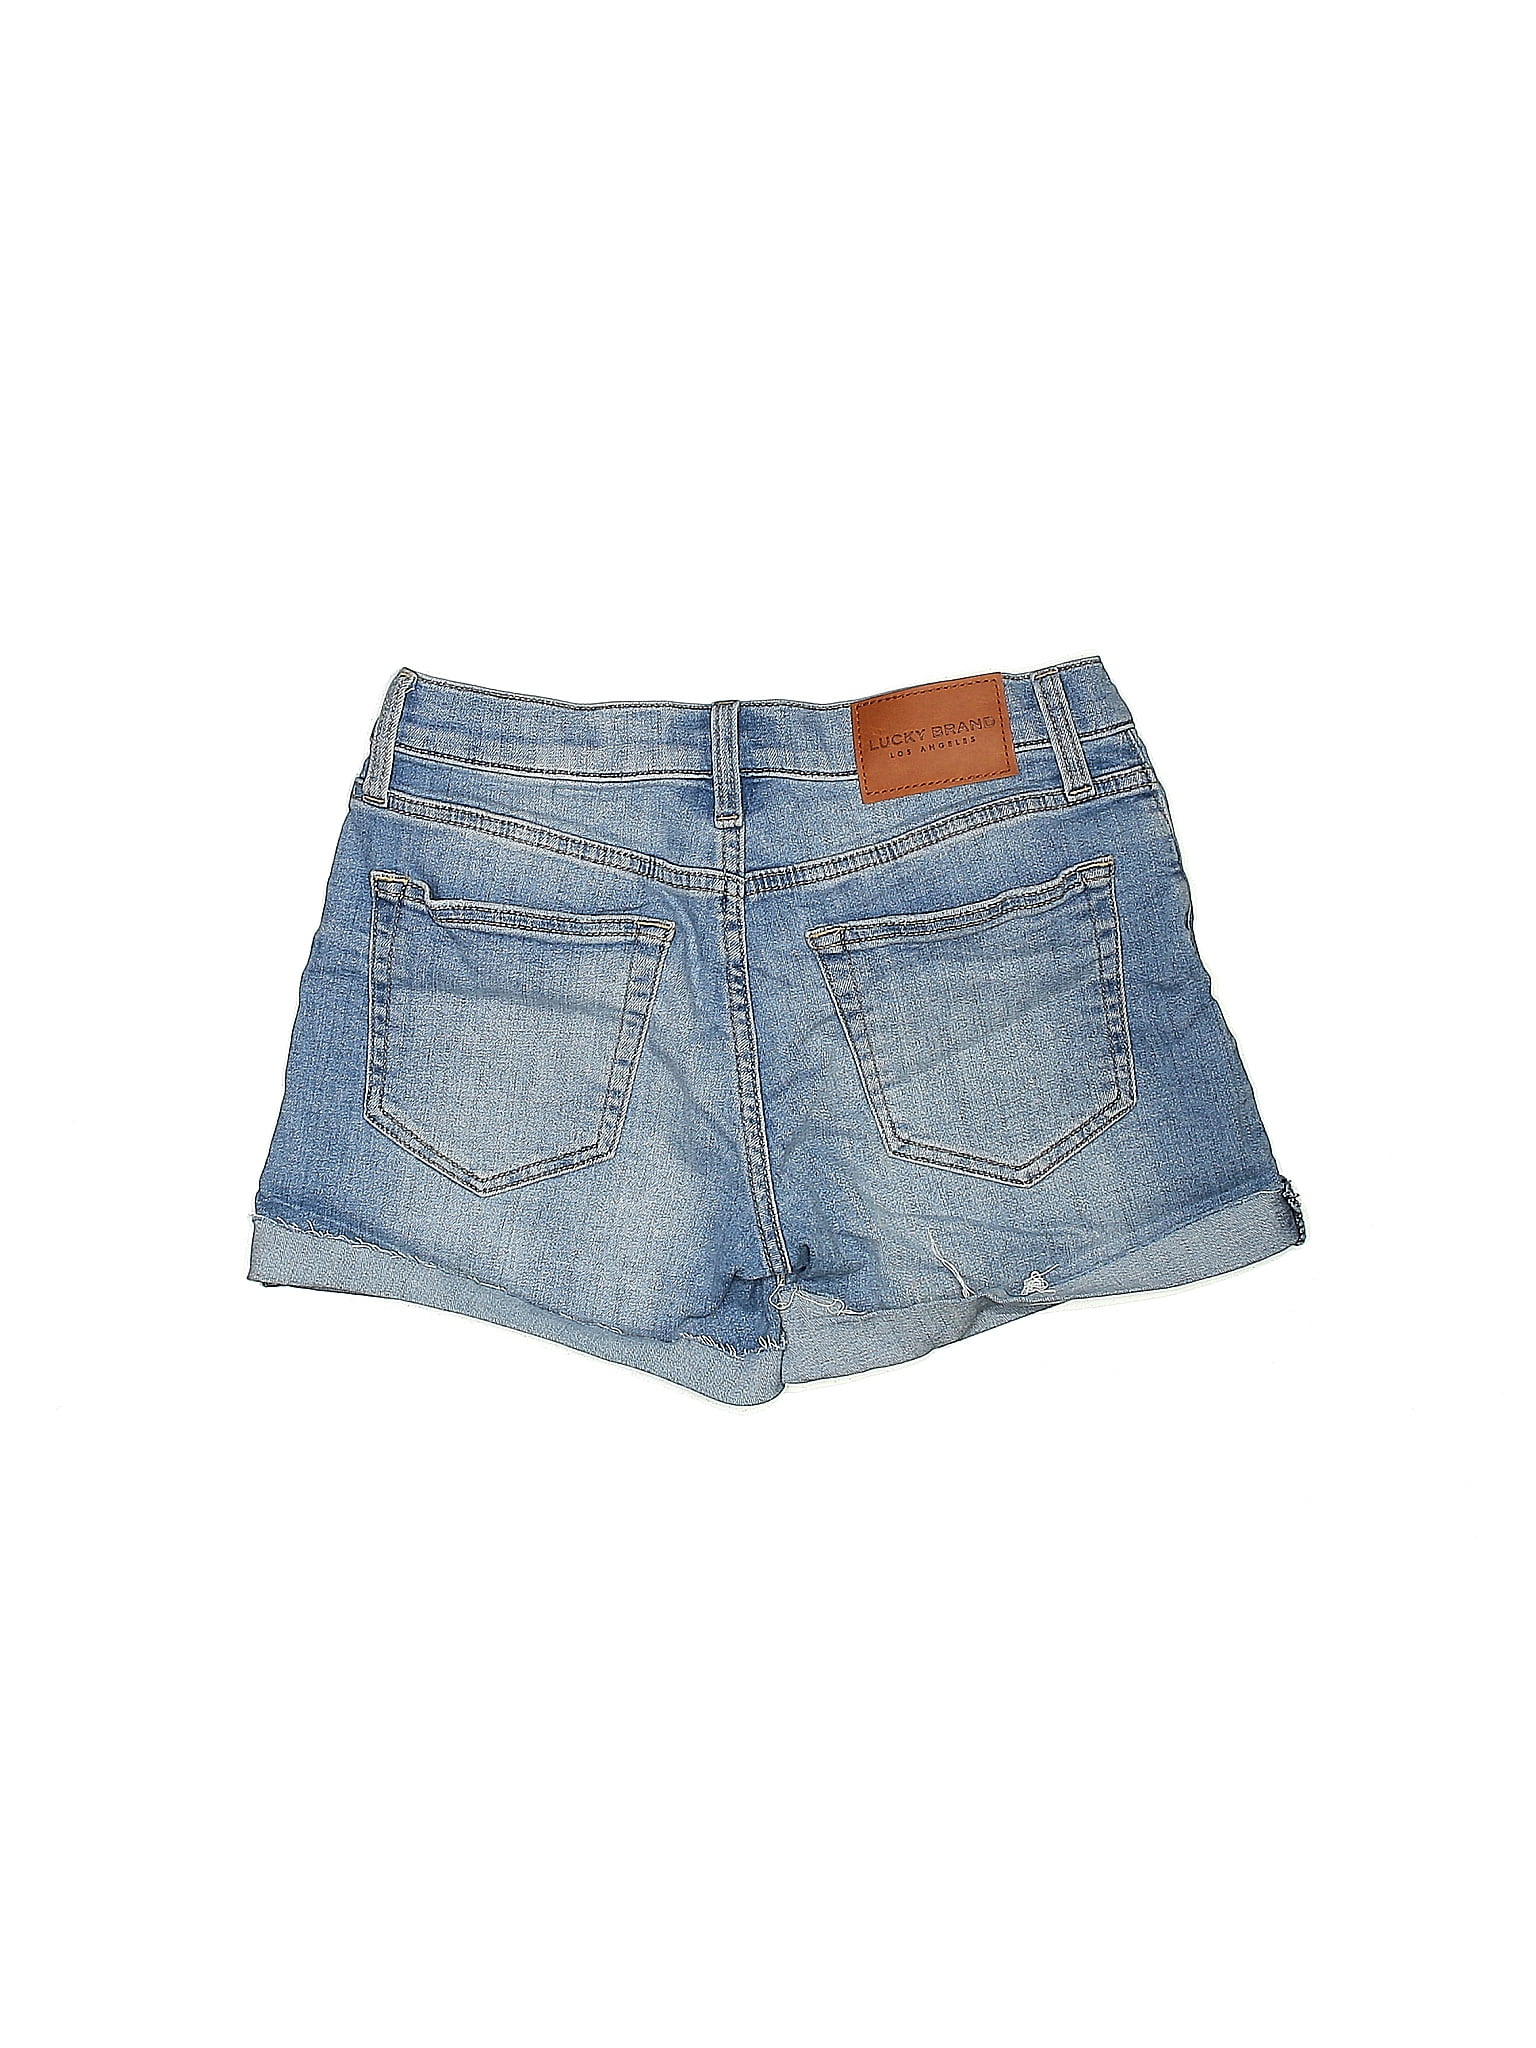 Lucky Brand Solid Blue Denim Shorts Size 4 - 71% off